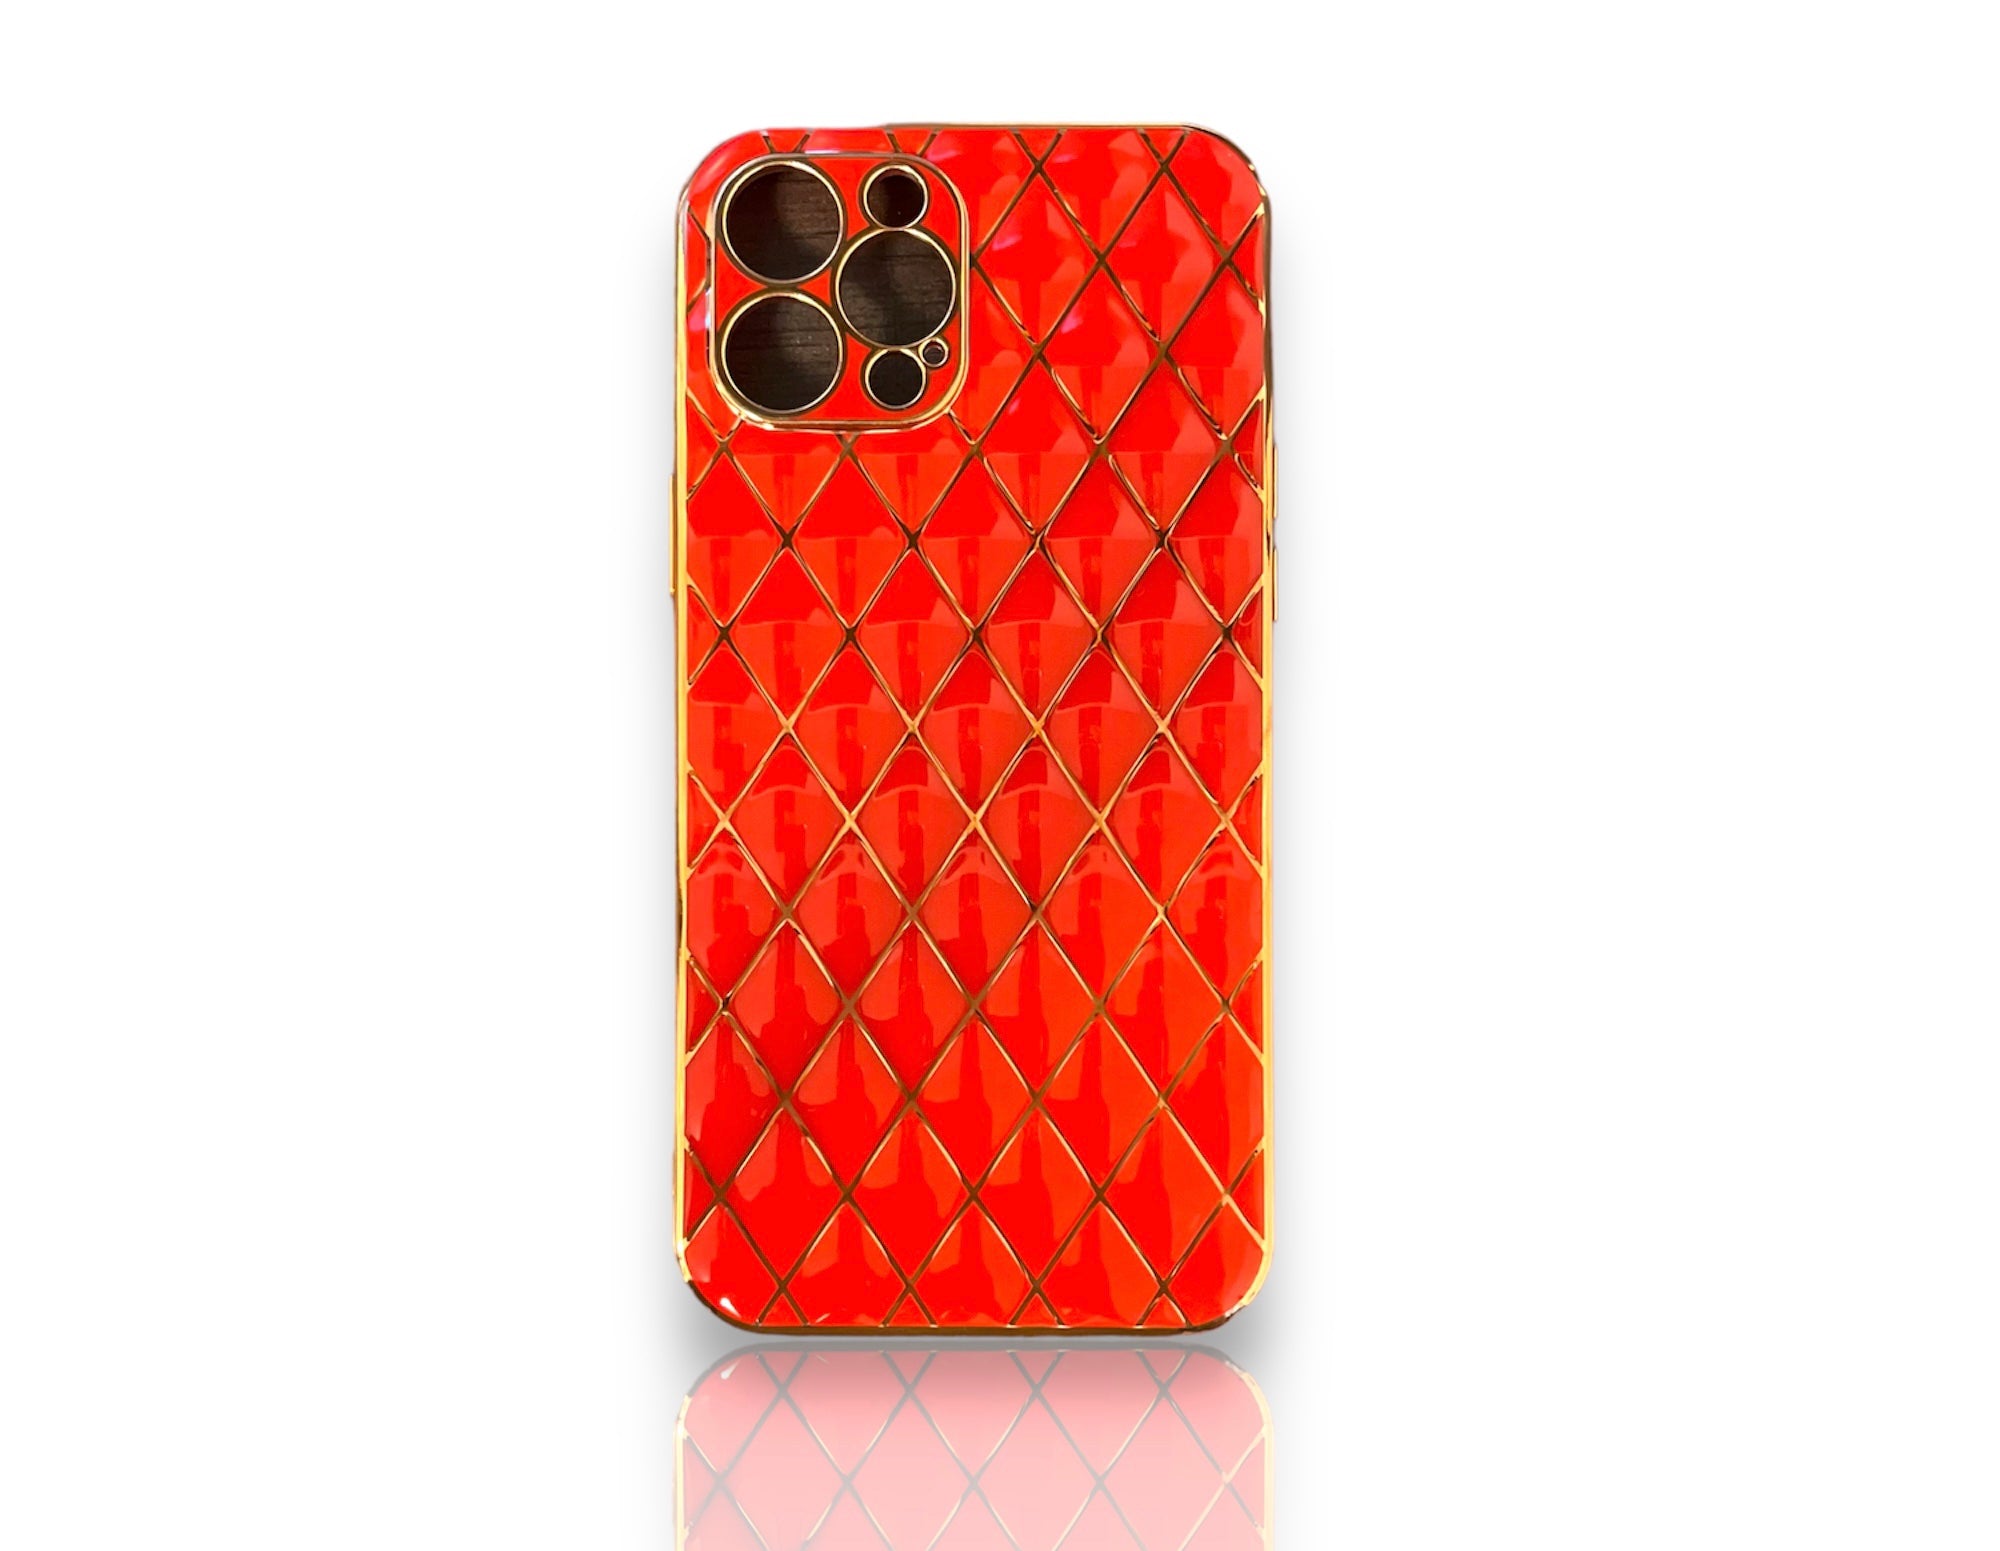 Quilted Pattern Hard TPU Case for iPhone